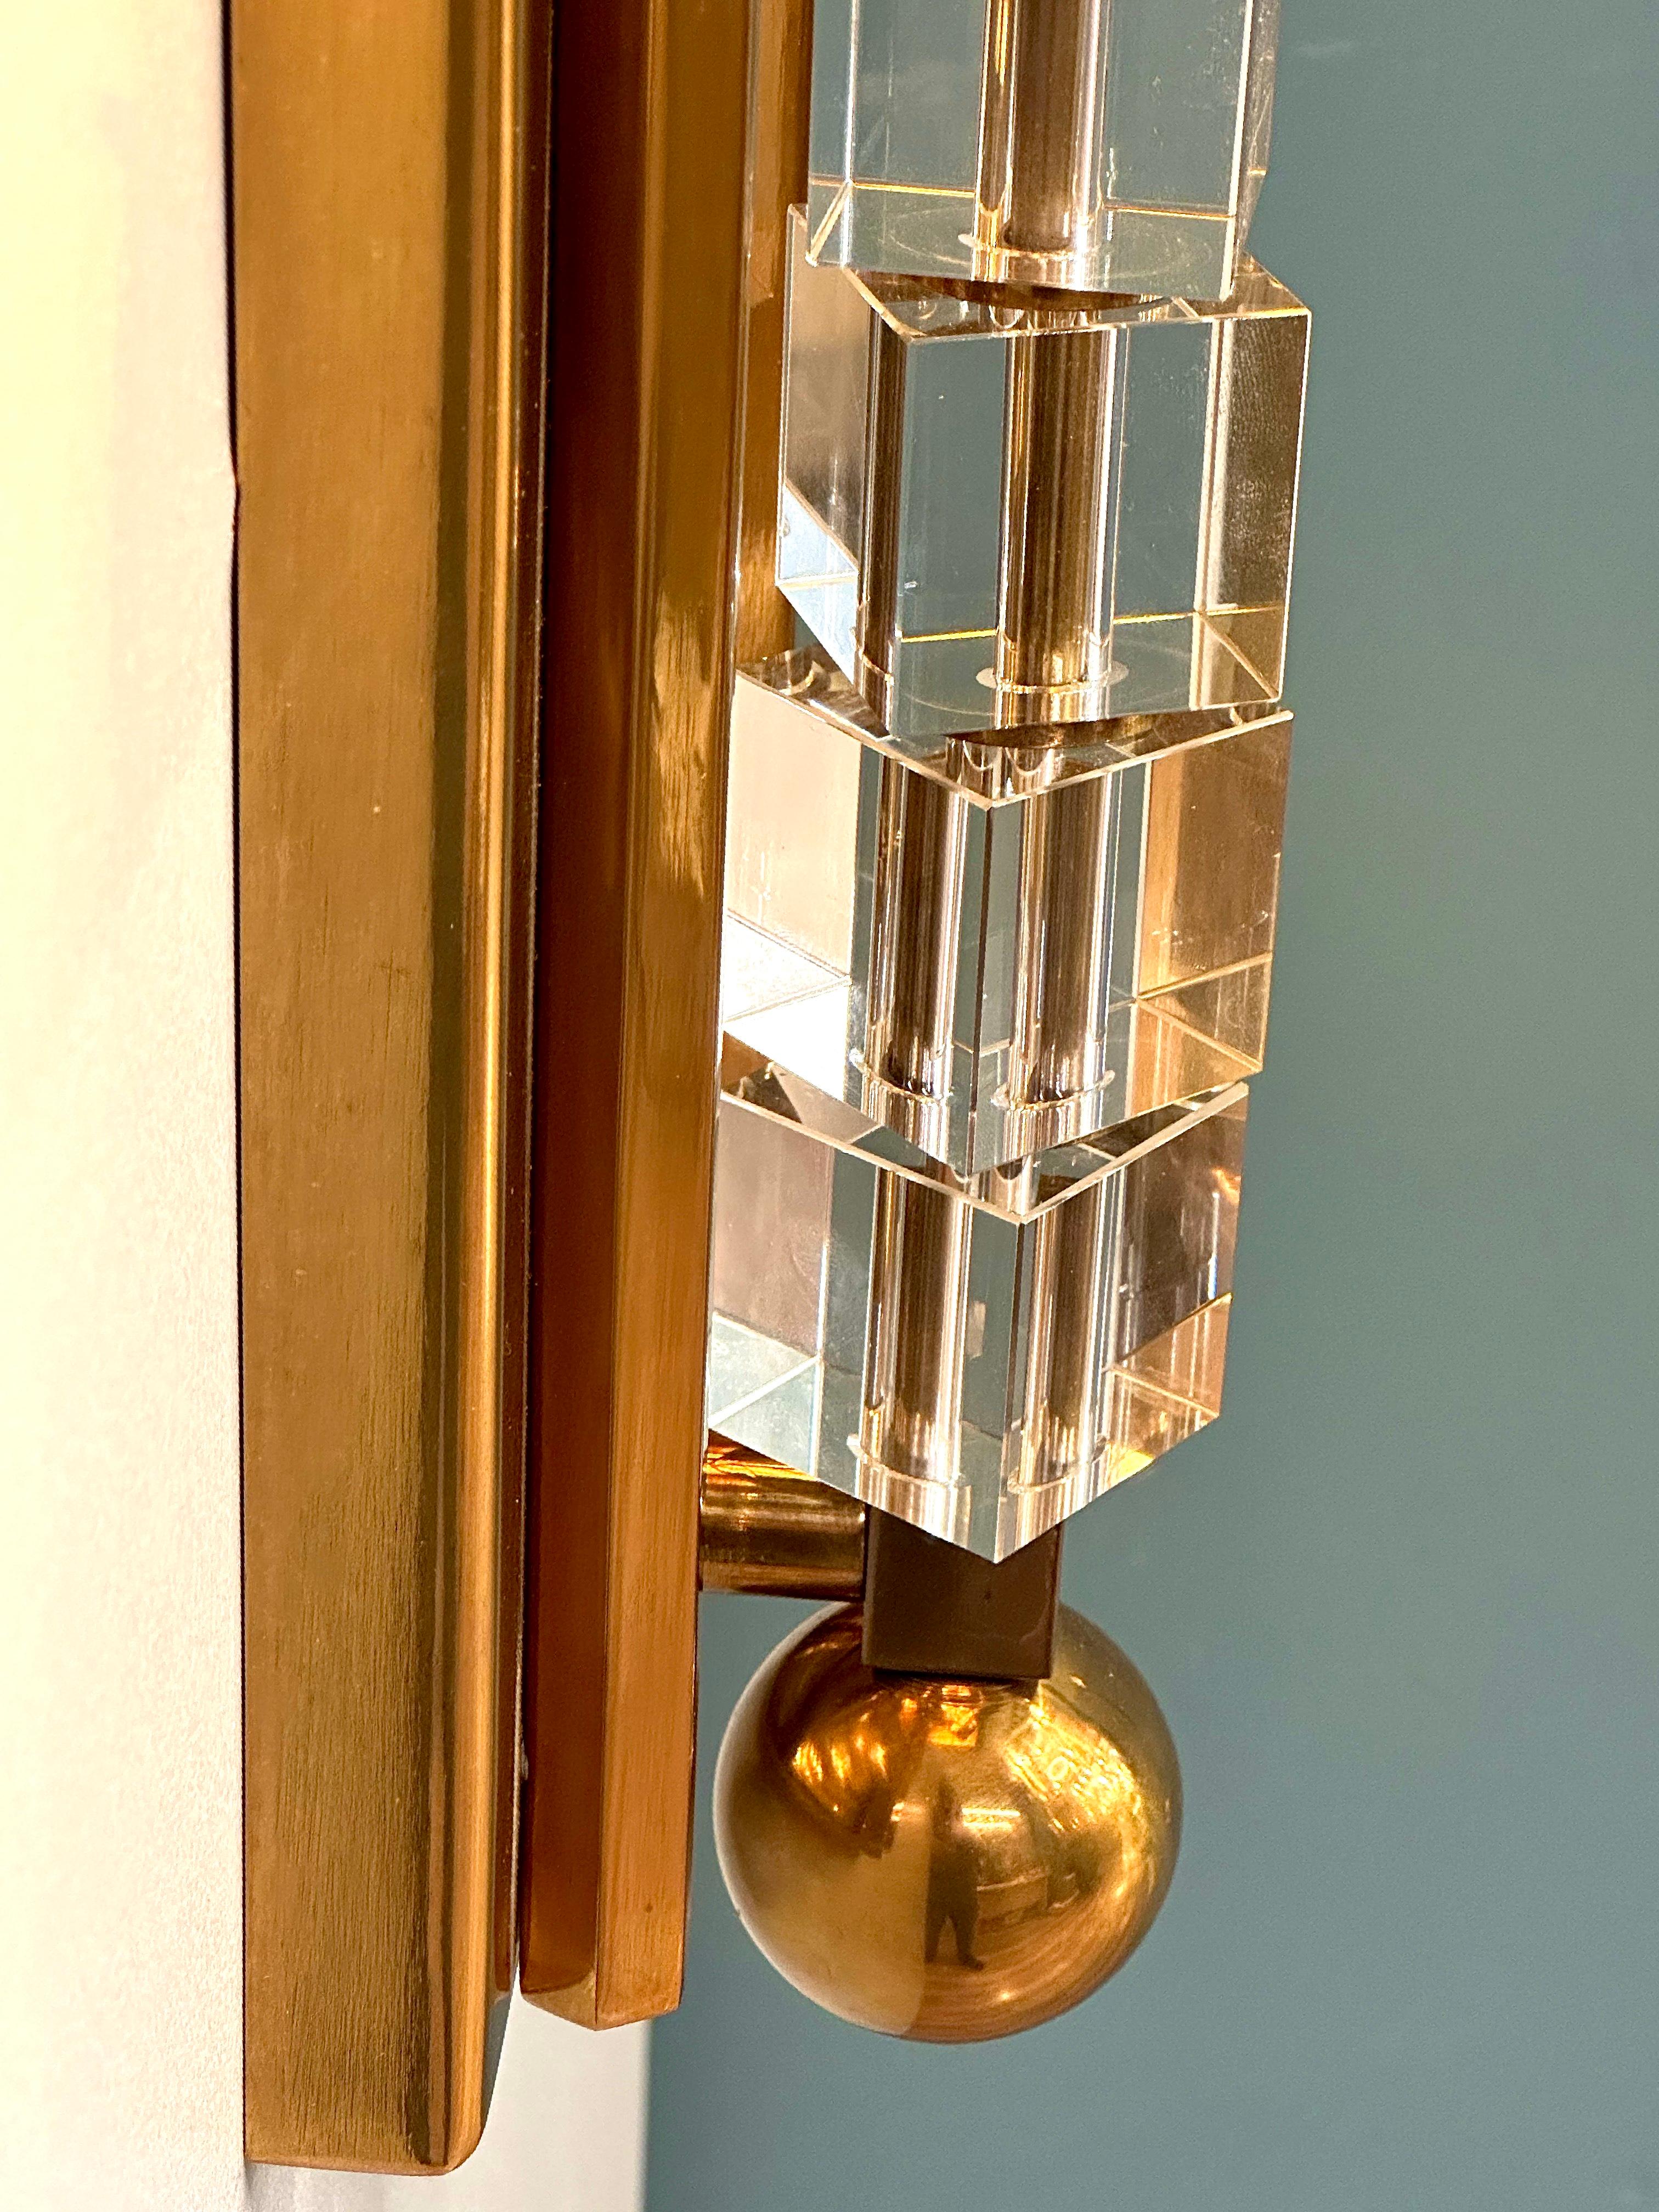 TORTONA Brass Casting Wall Sconce, a radiant luminary that goes beyond mere lighting, serving as an artful centerpiece in your interior design. This wall sconce is a harmonious marriage of chic aesthetics and sophisticated illumination, bringing a